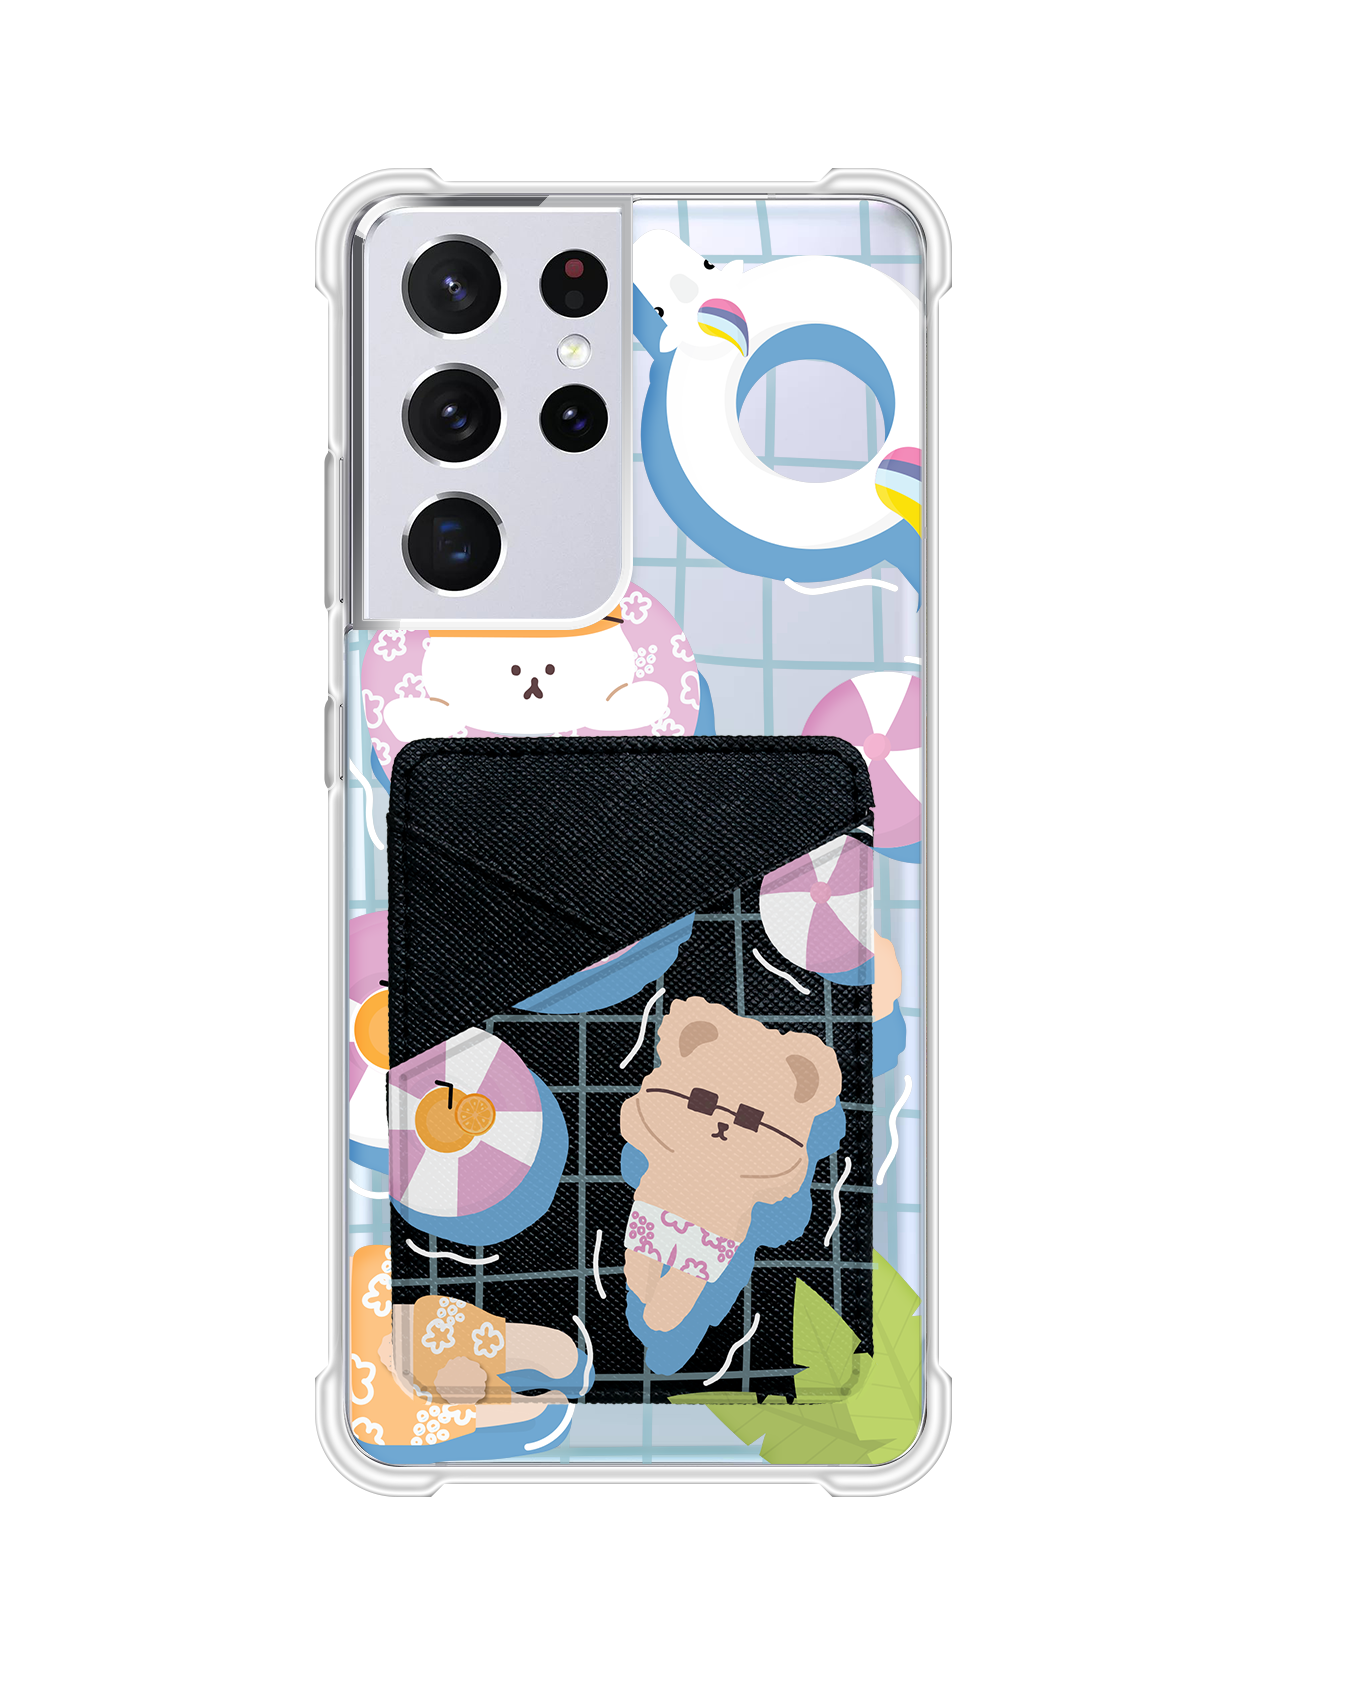 Android Phone Wallet Case - Pool Party 2.0